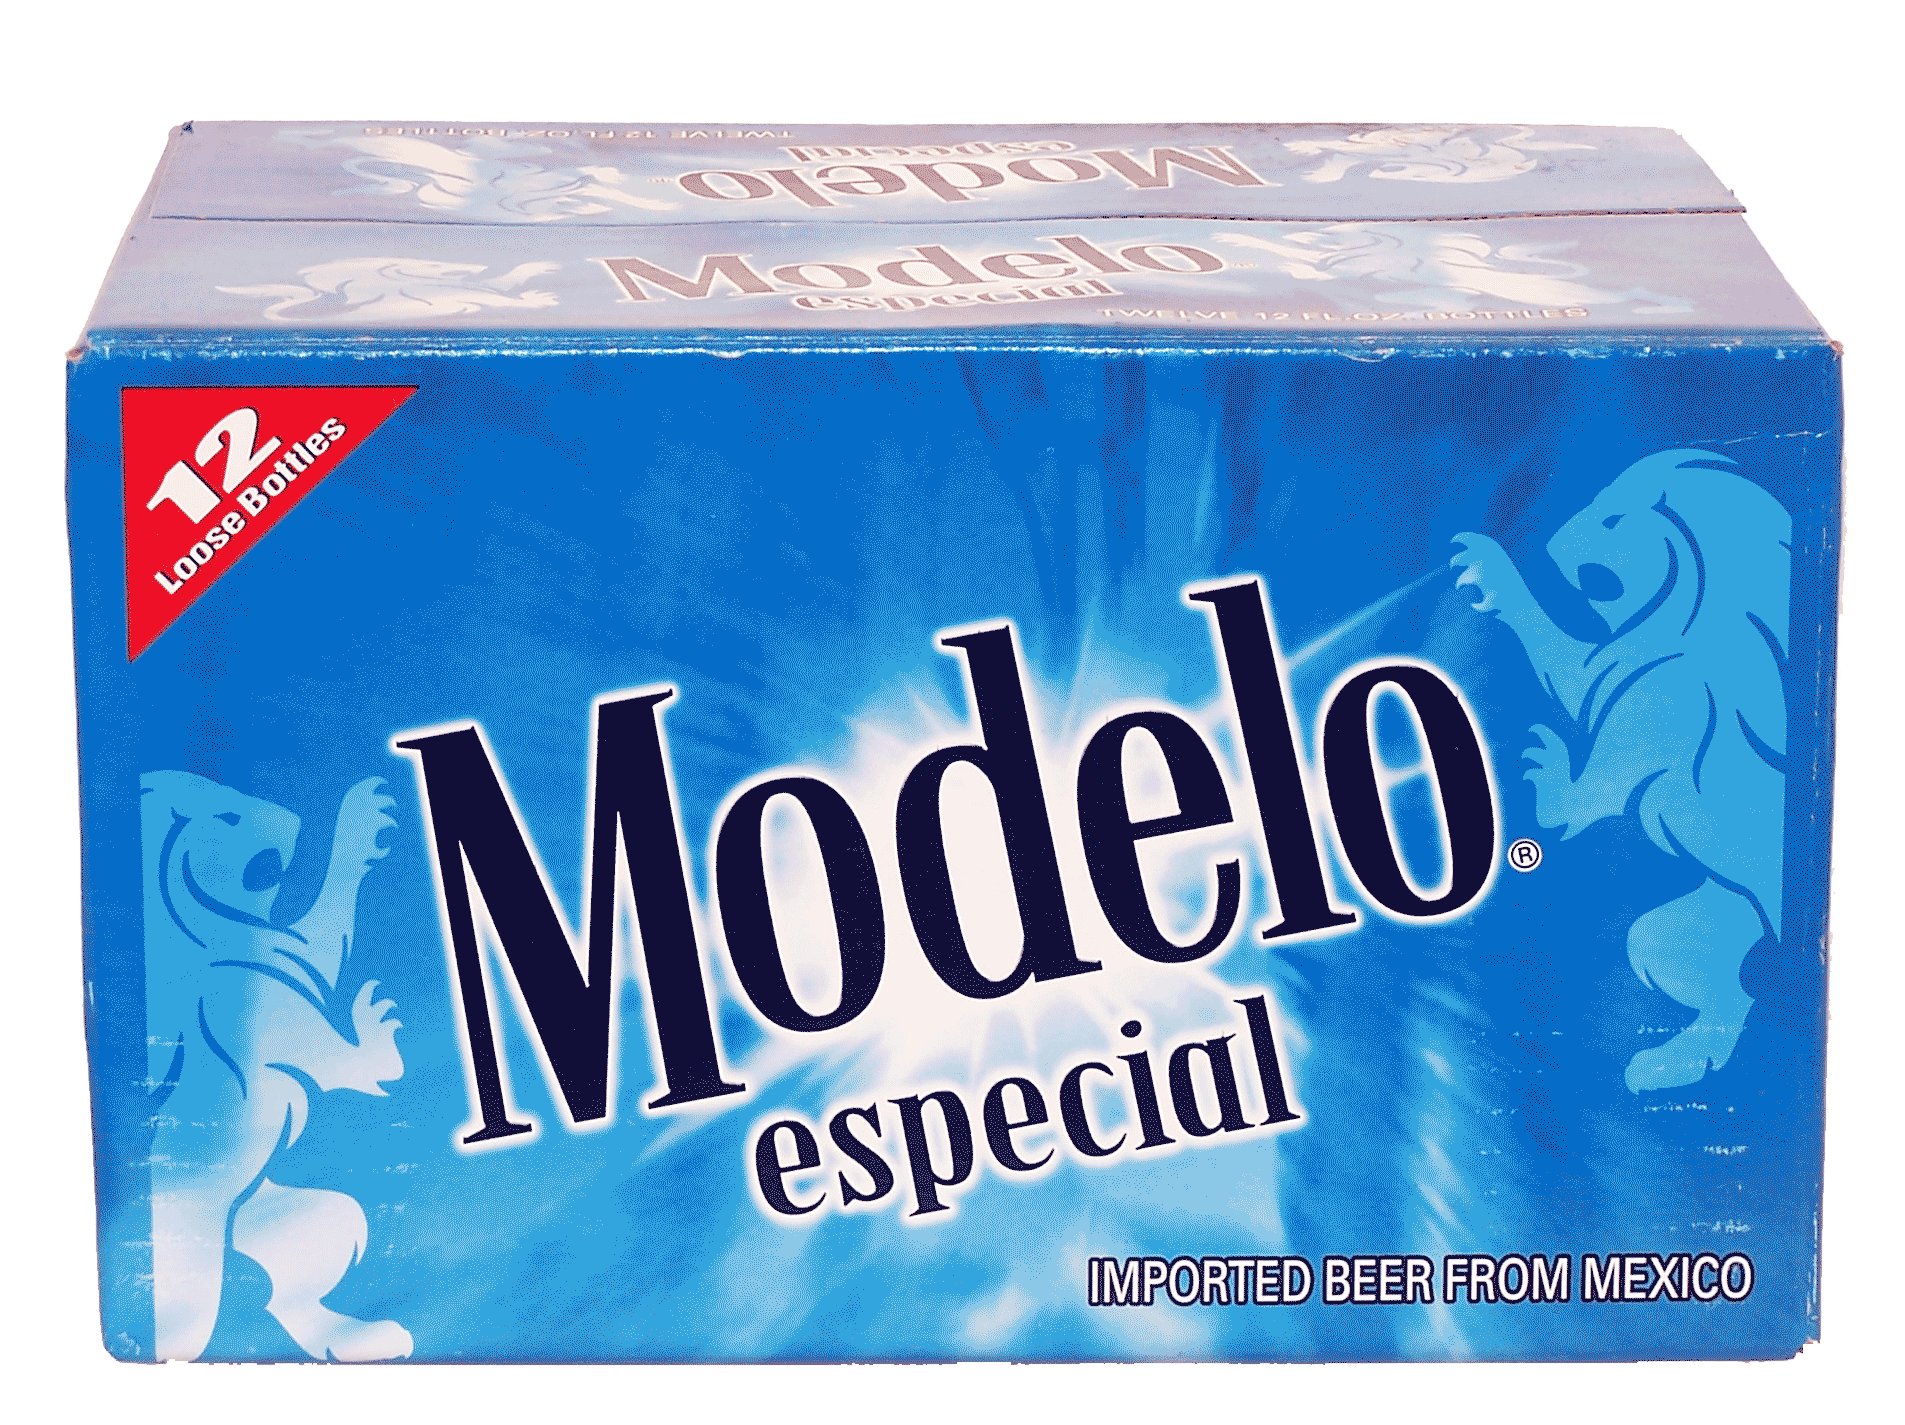 Product Infomation for Modelo Especial imported